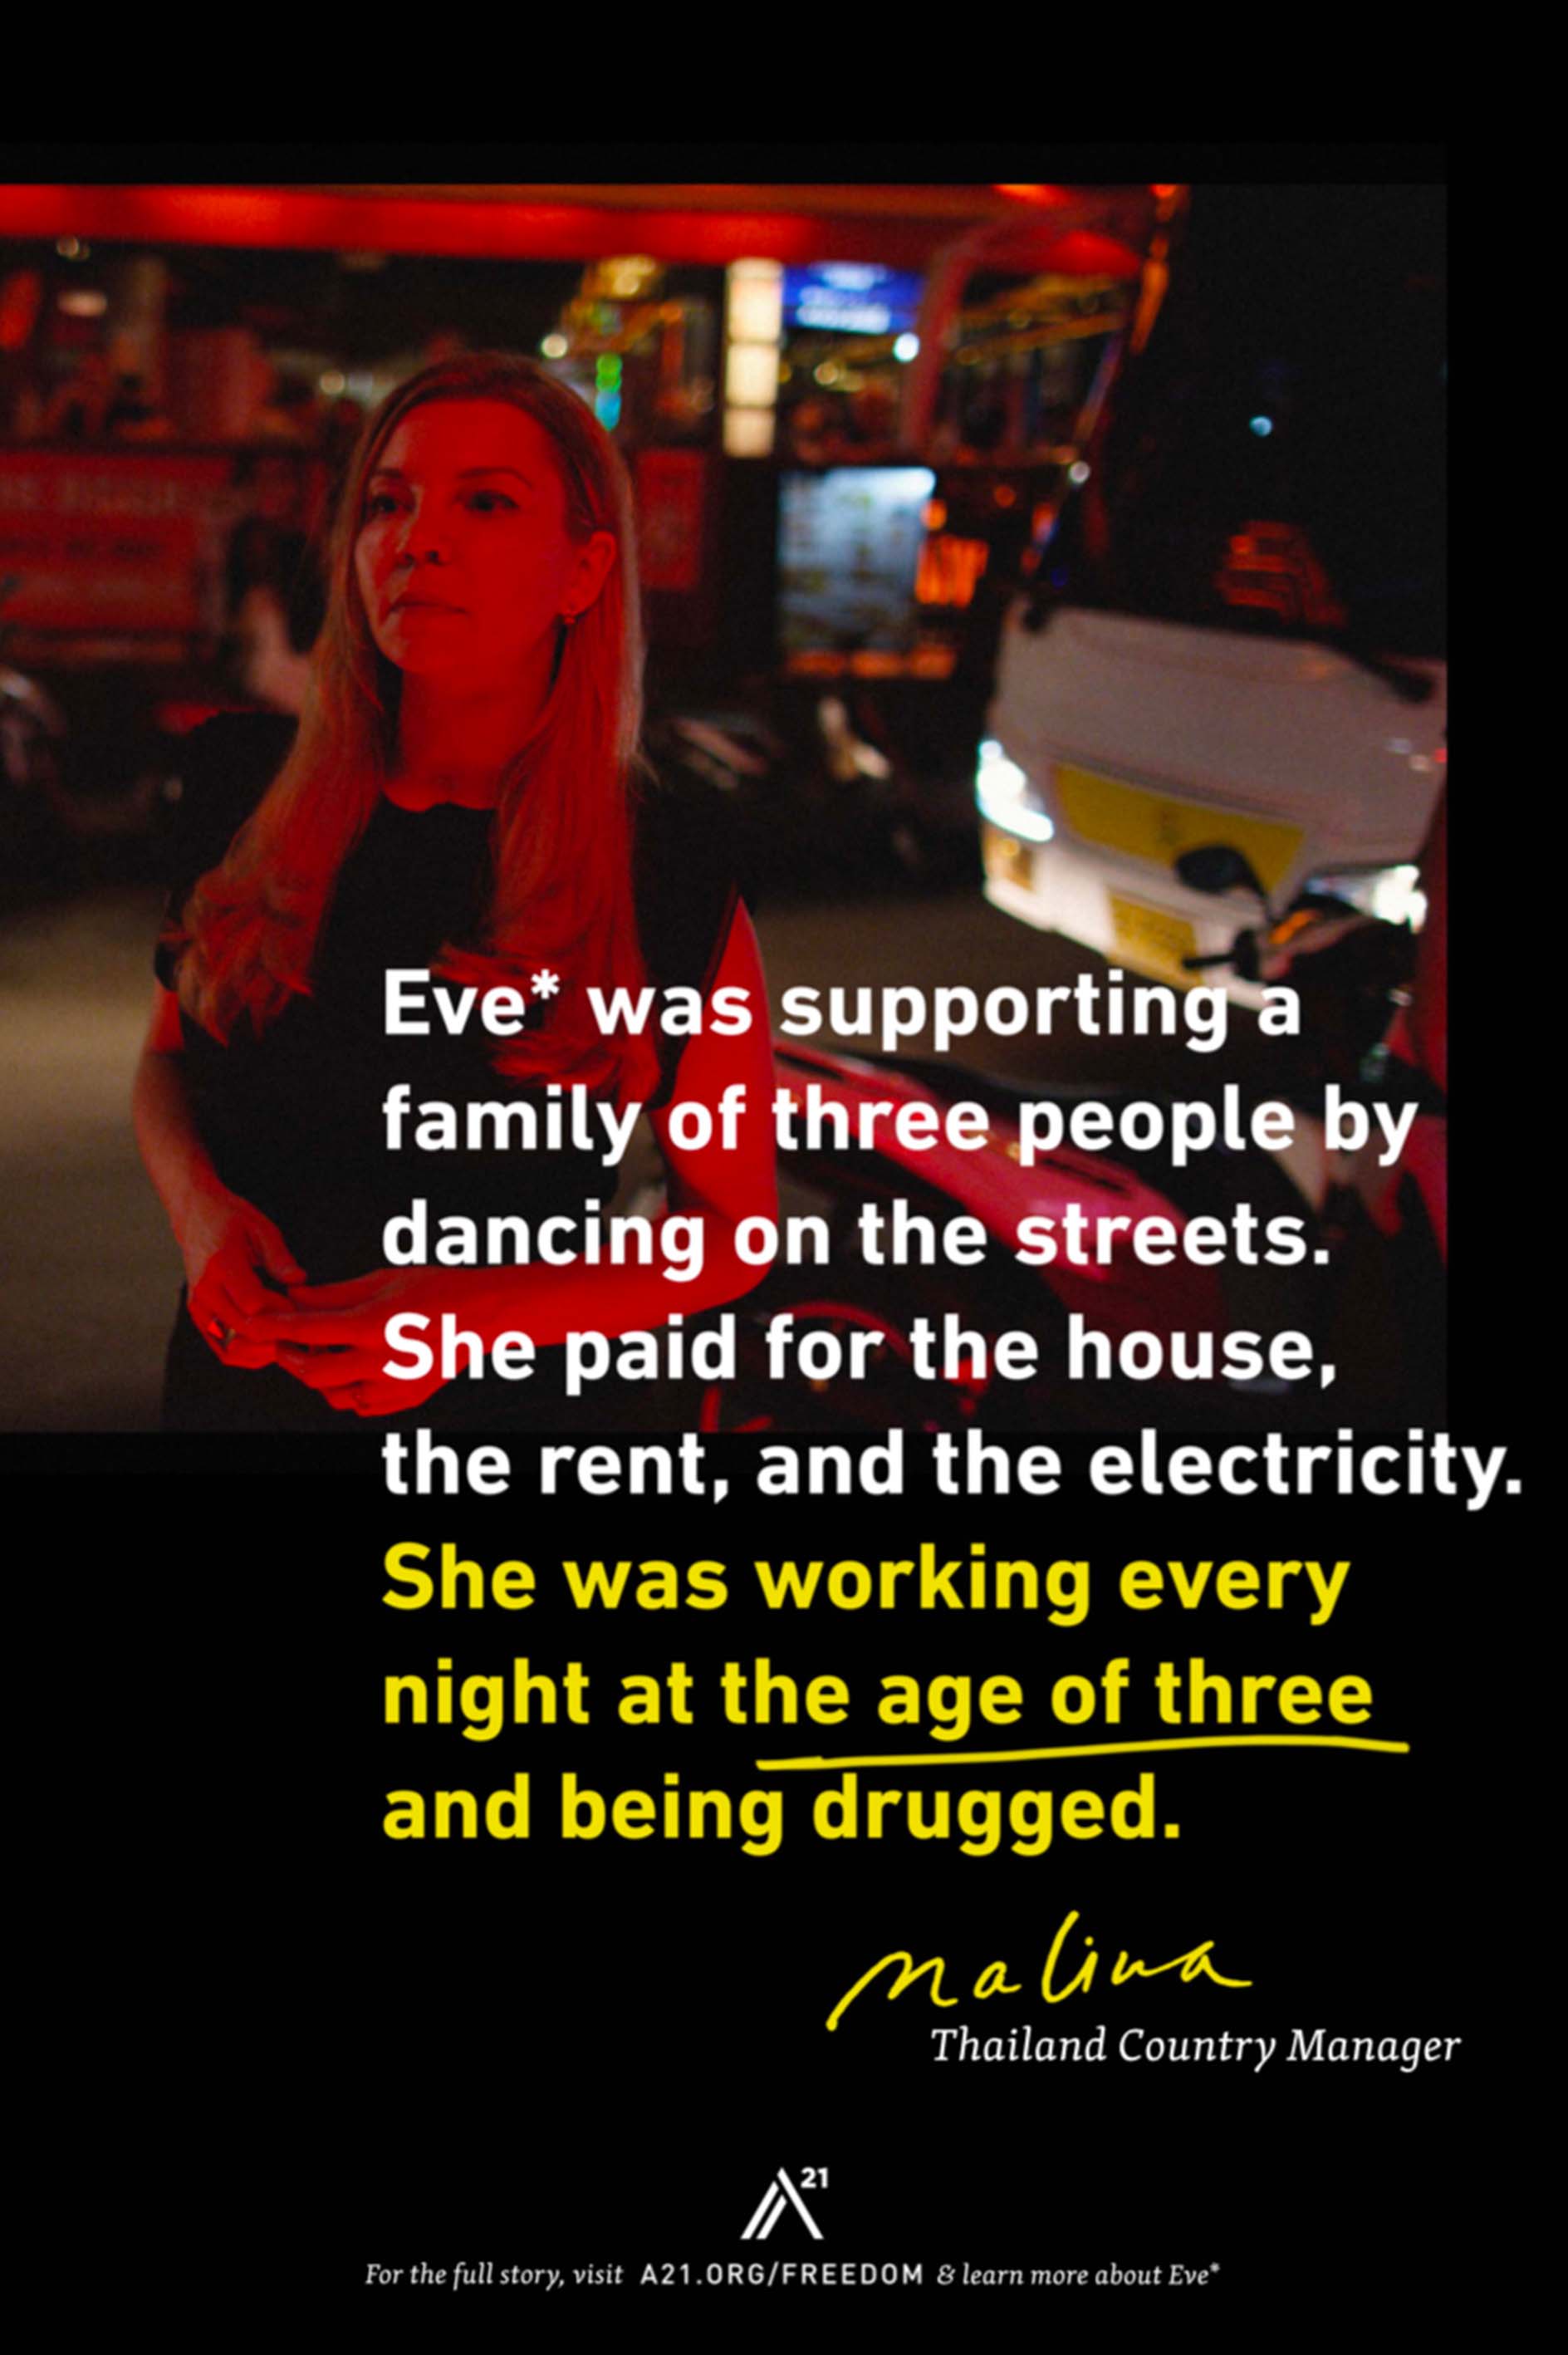 Poster 5: Eve* was supporting a family of three people by dancing on the streets. She paid for the house, the rent, and the electricity. She was working every night at the age of three and being drugged. Malina, Thailand Country Manager